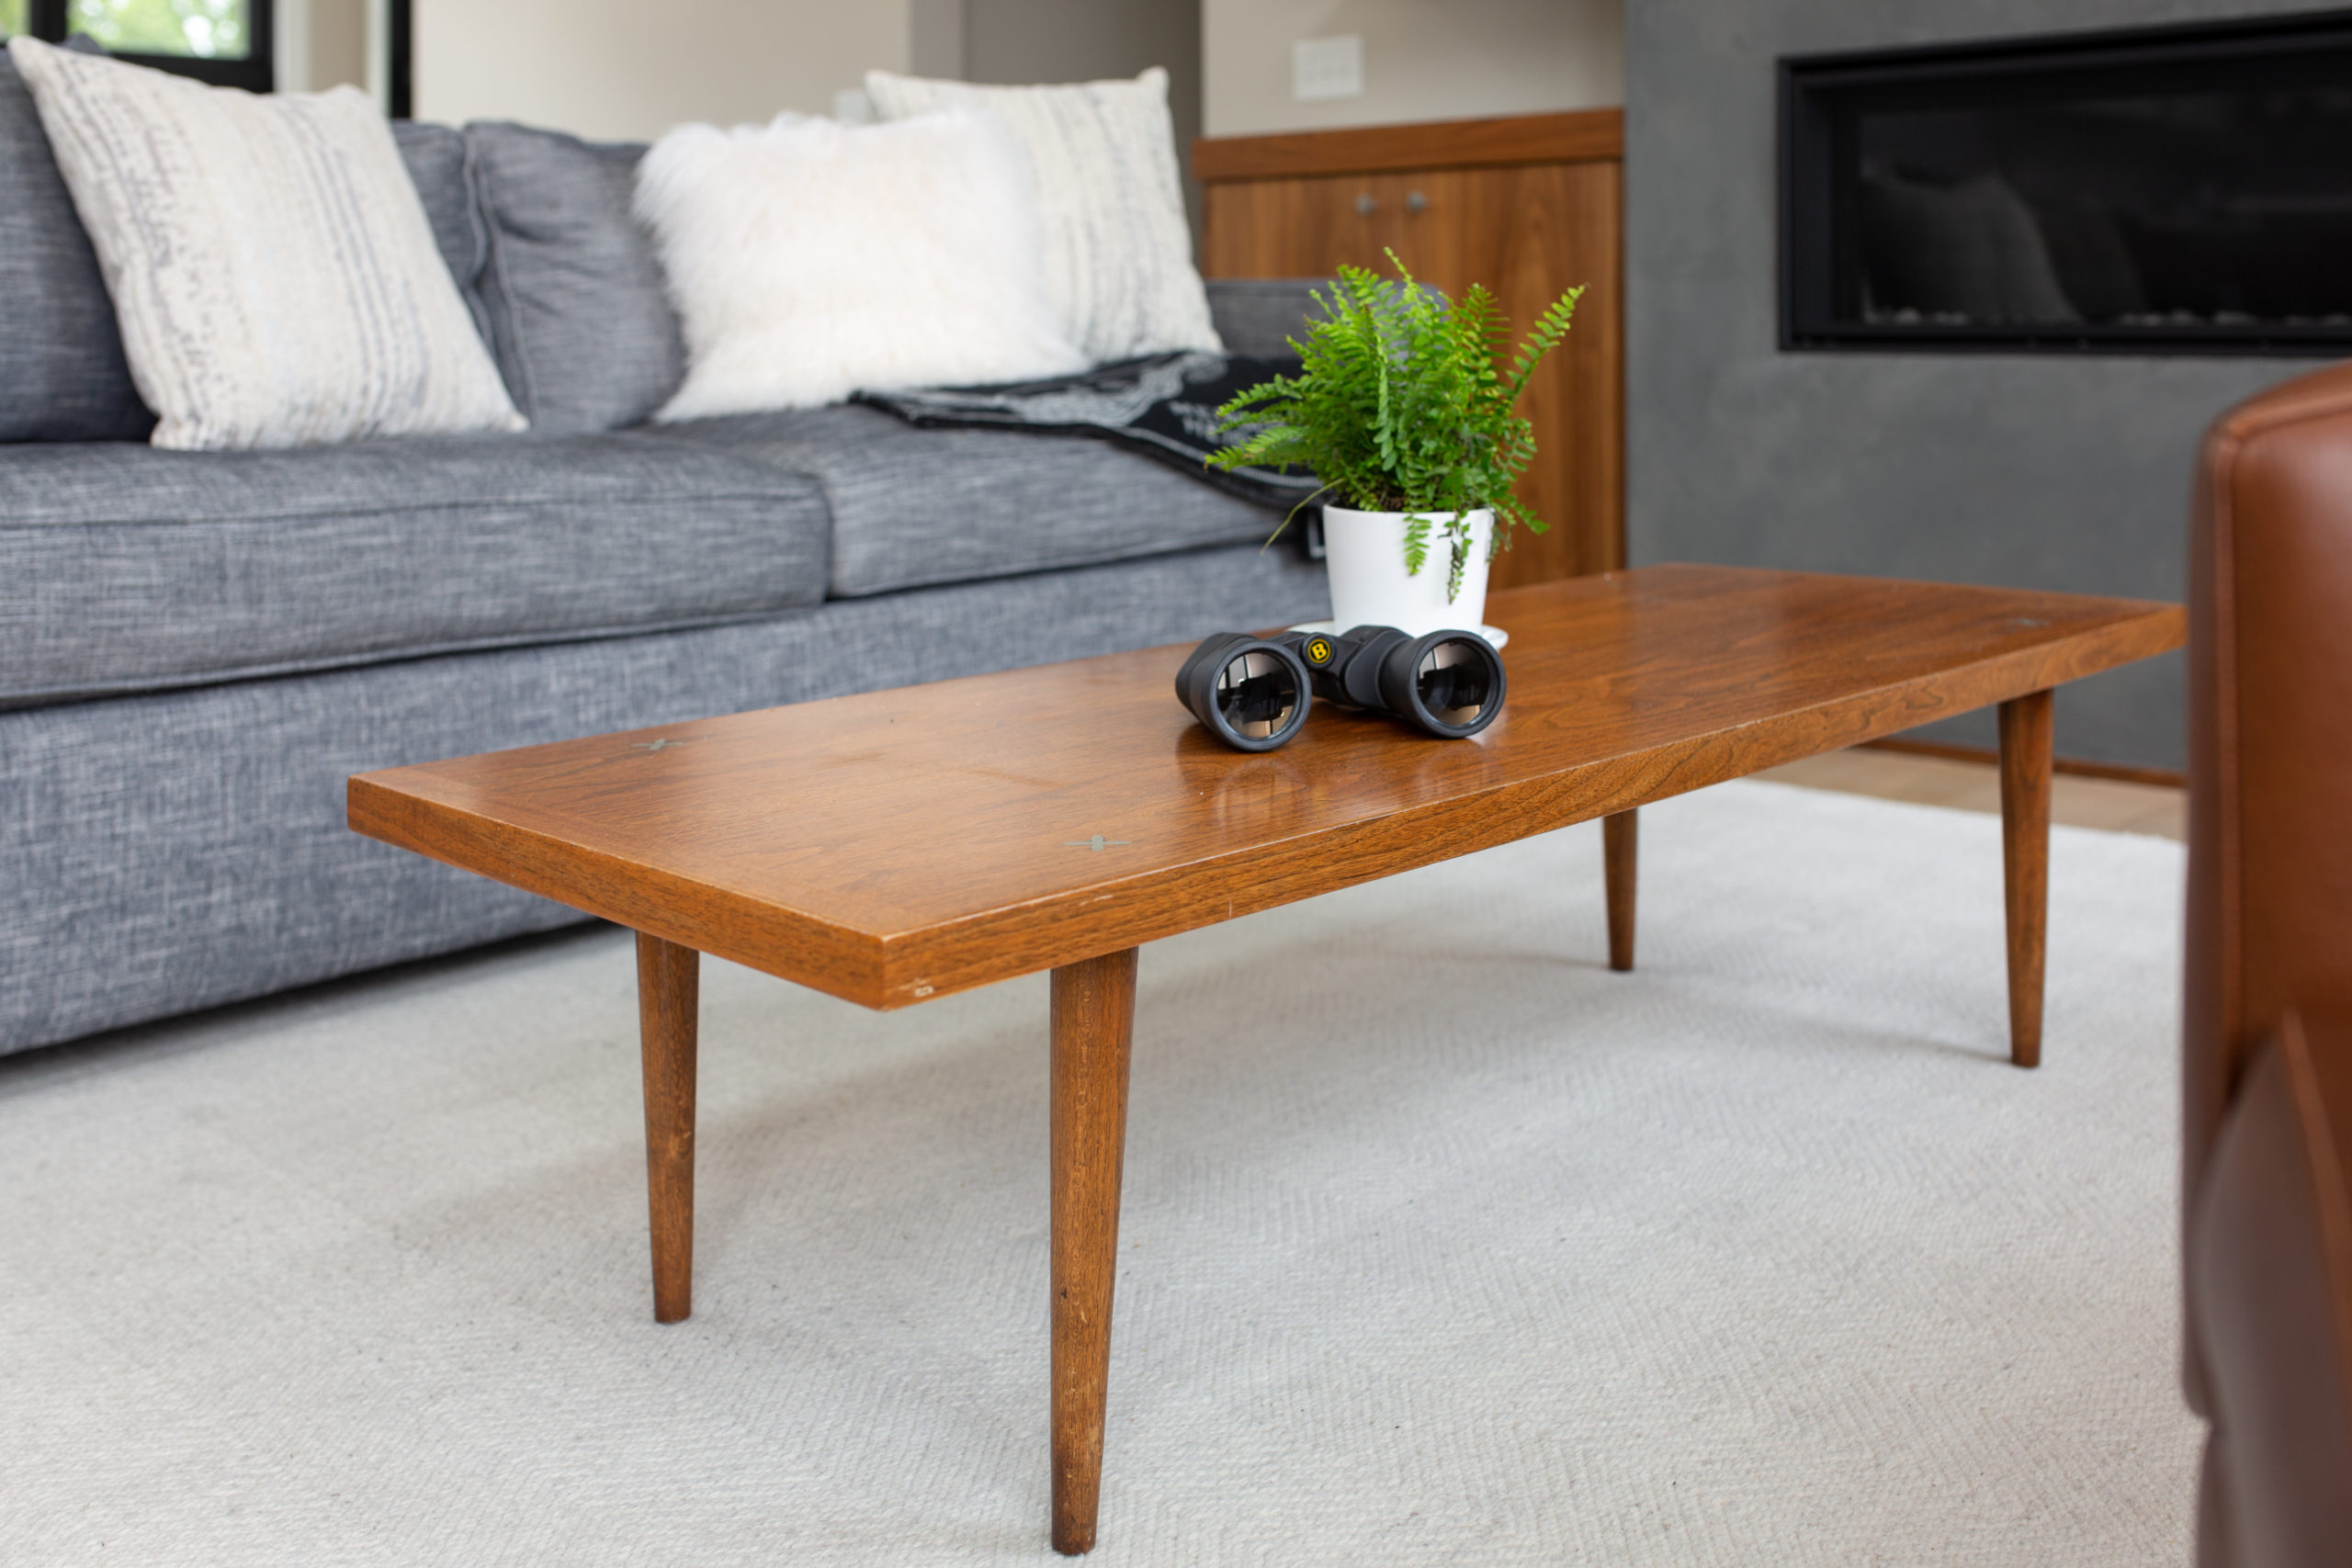 A coffee table in a living room.